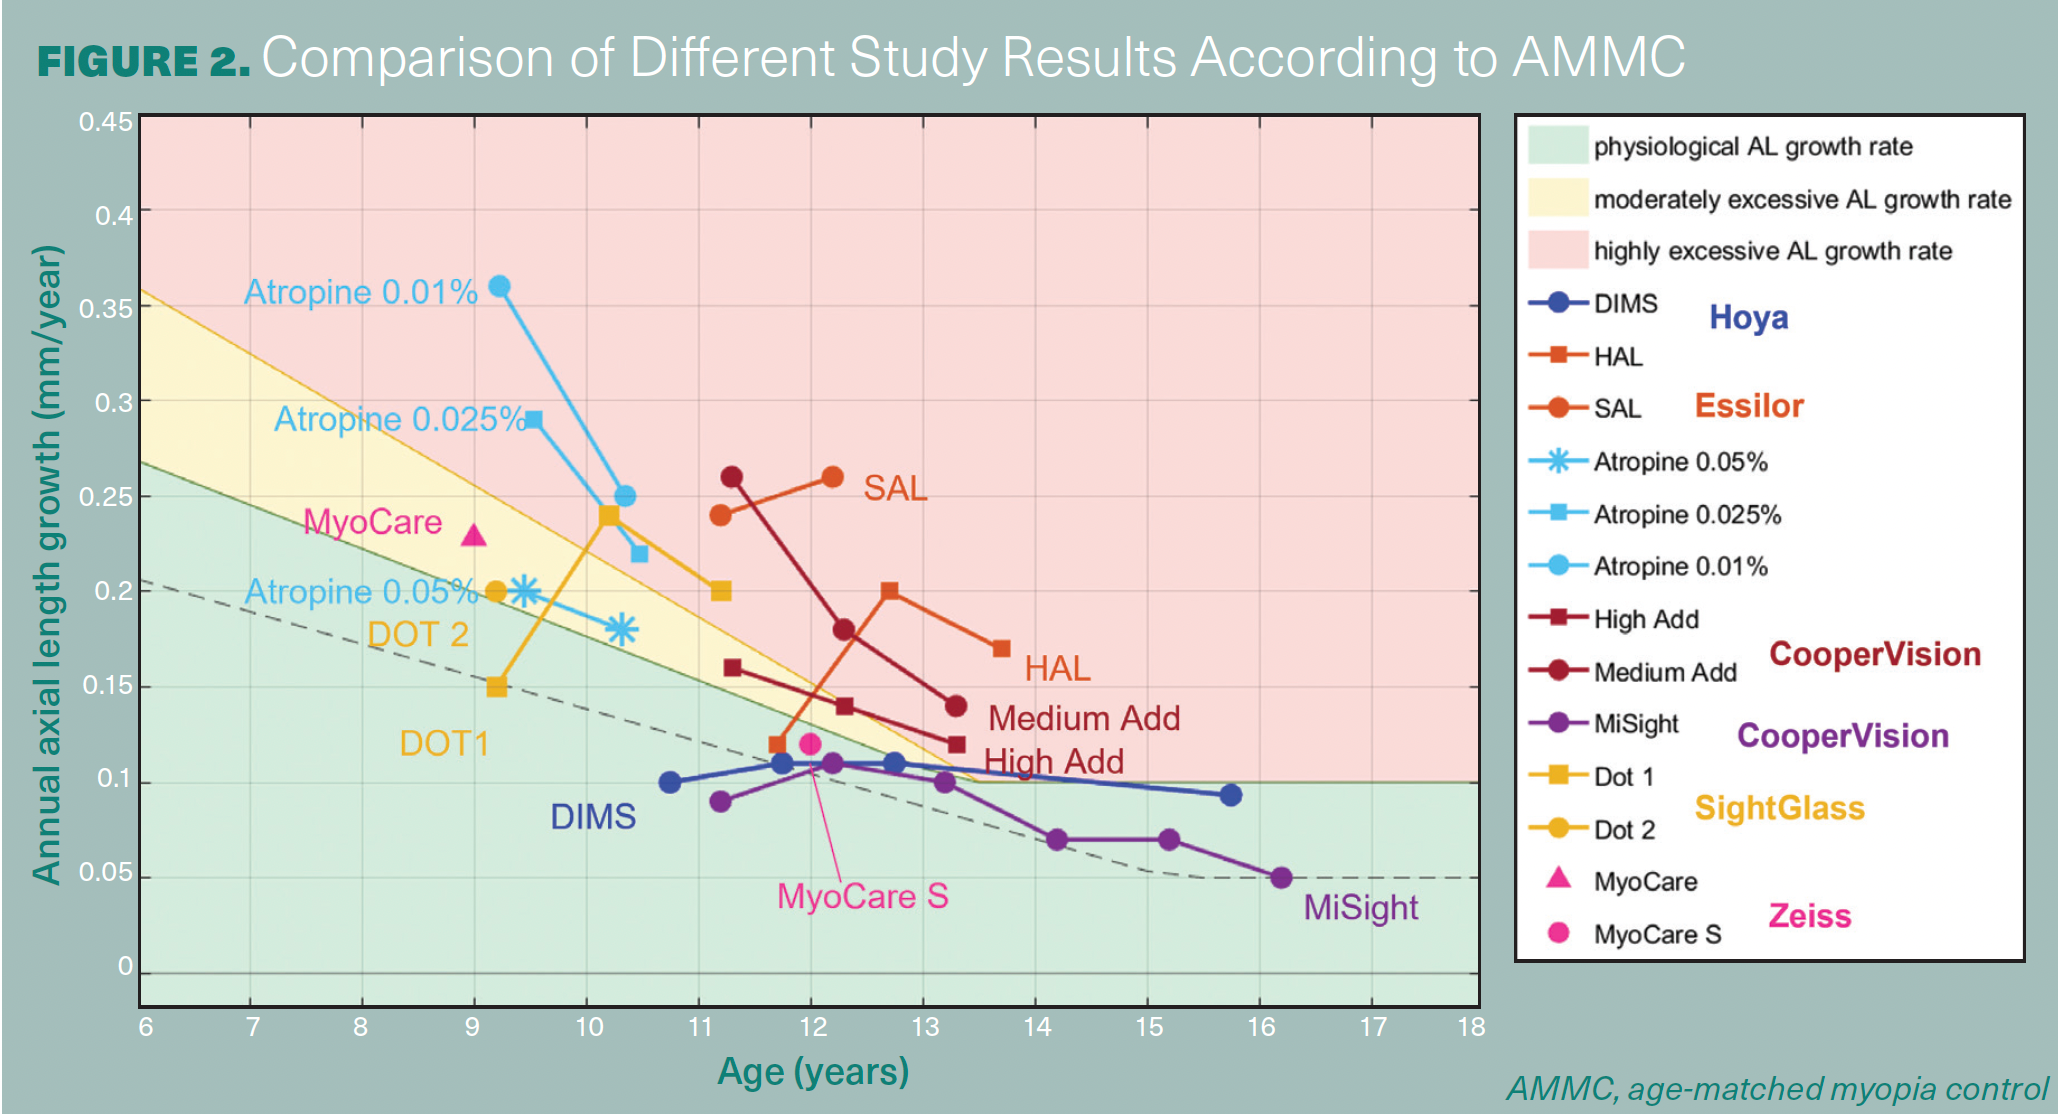 Figure 2 shows a comparison of different study results according to age-matched myopia control